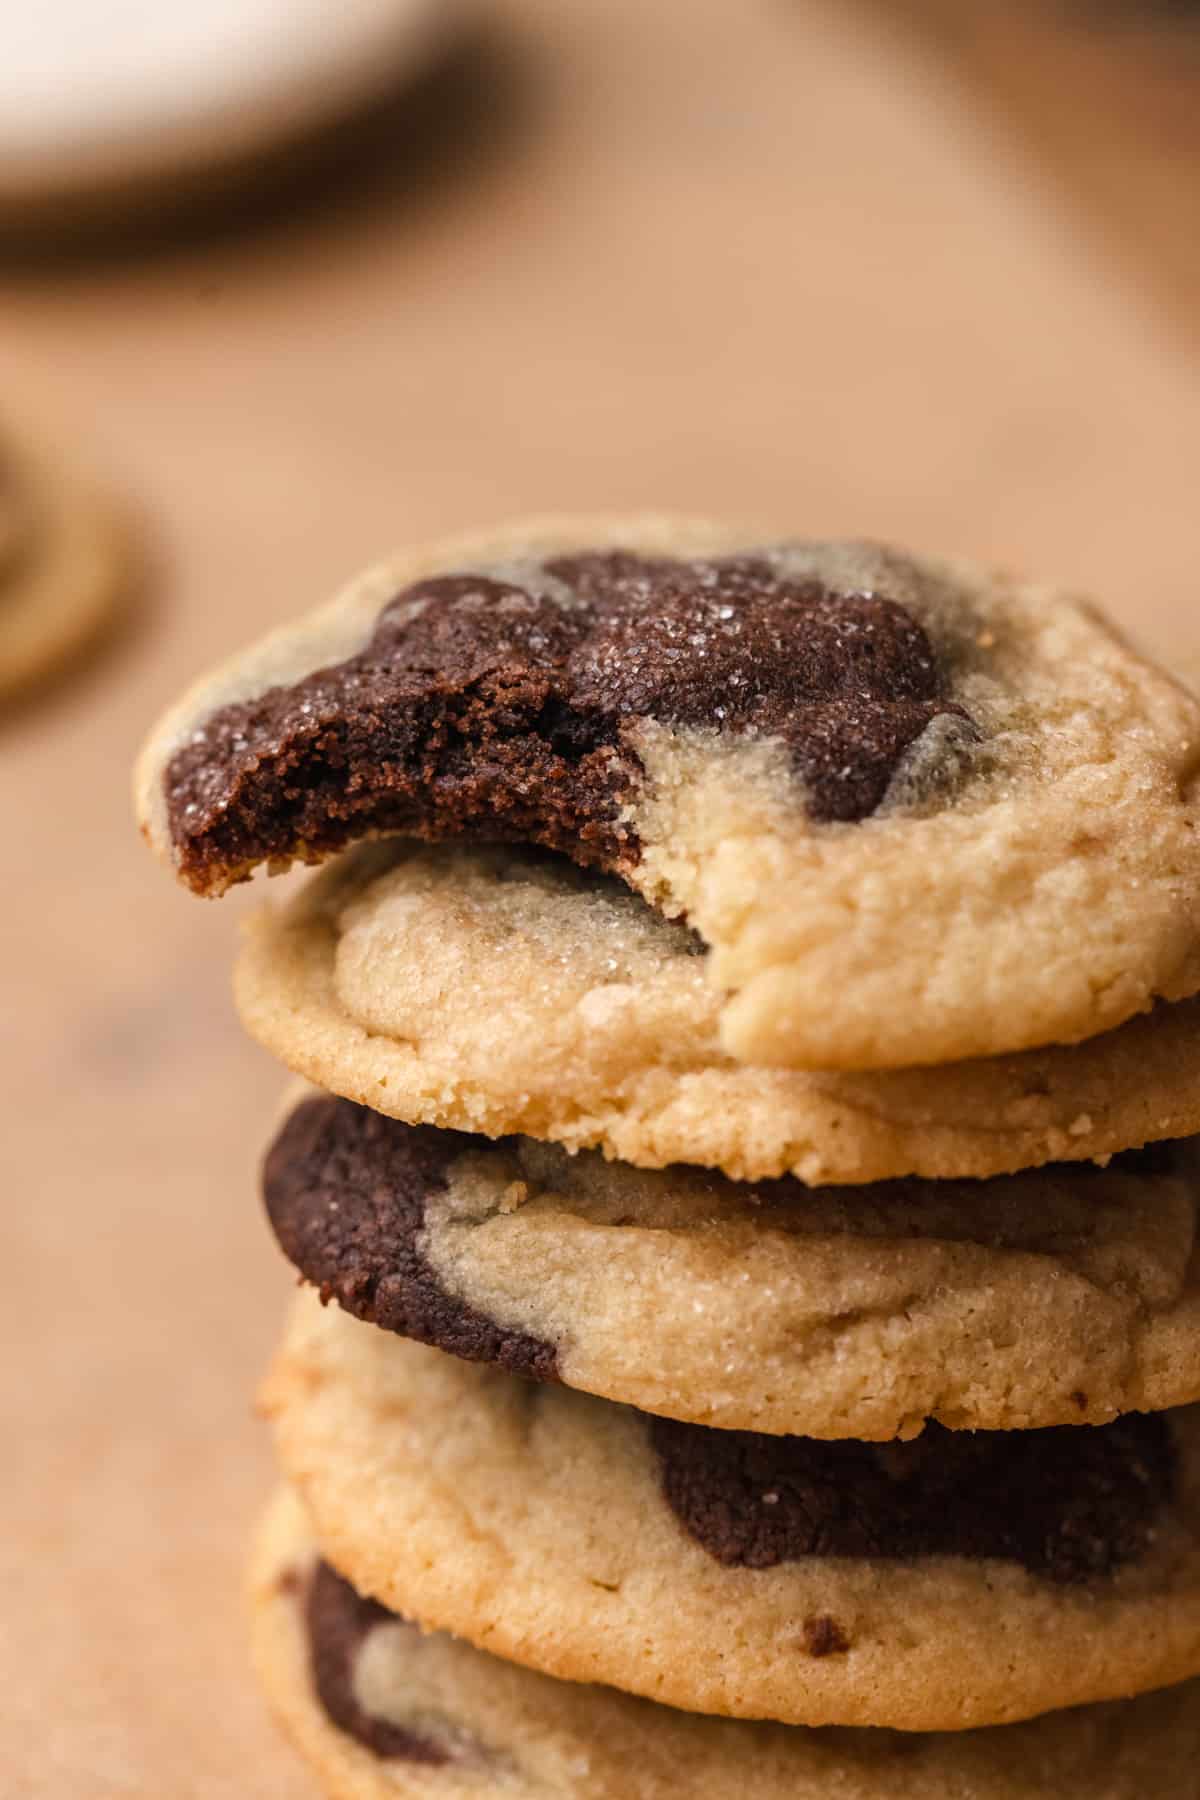 A stack of chocolate marble cookies with a bite taken out of the top cookie.